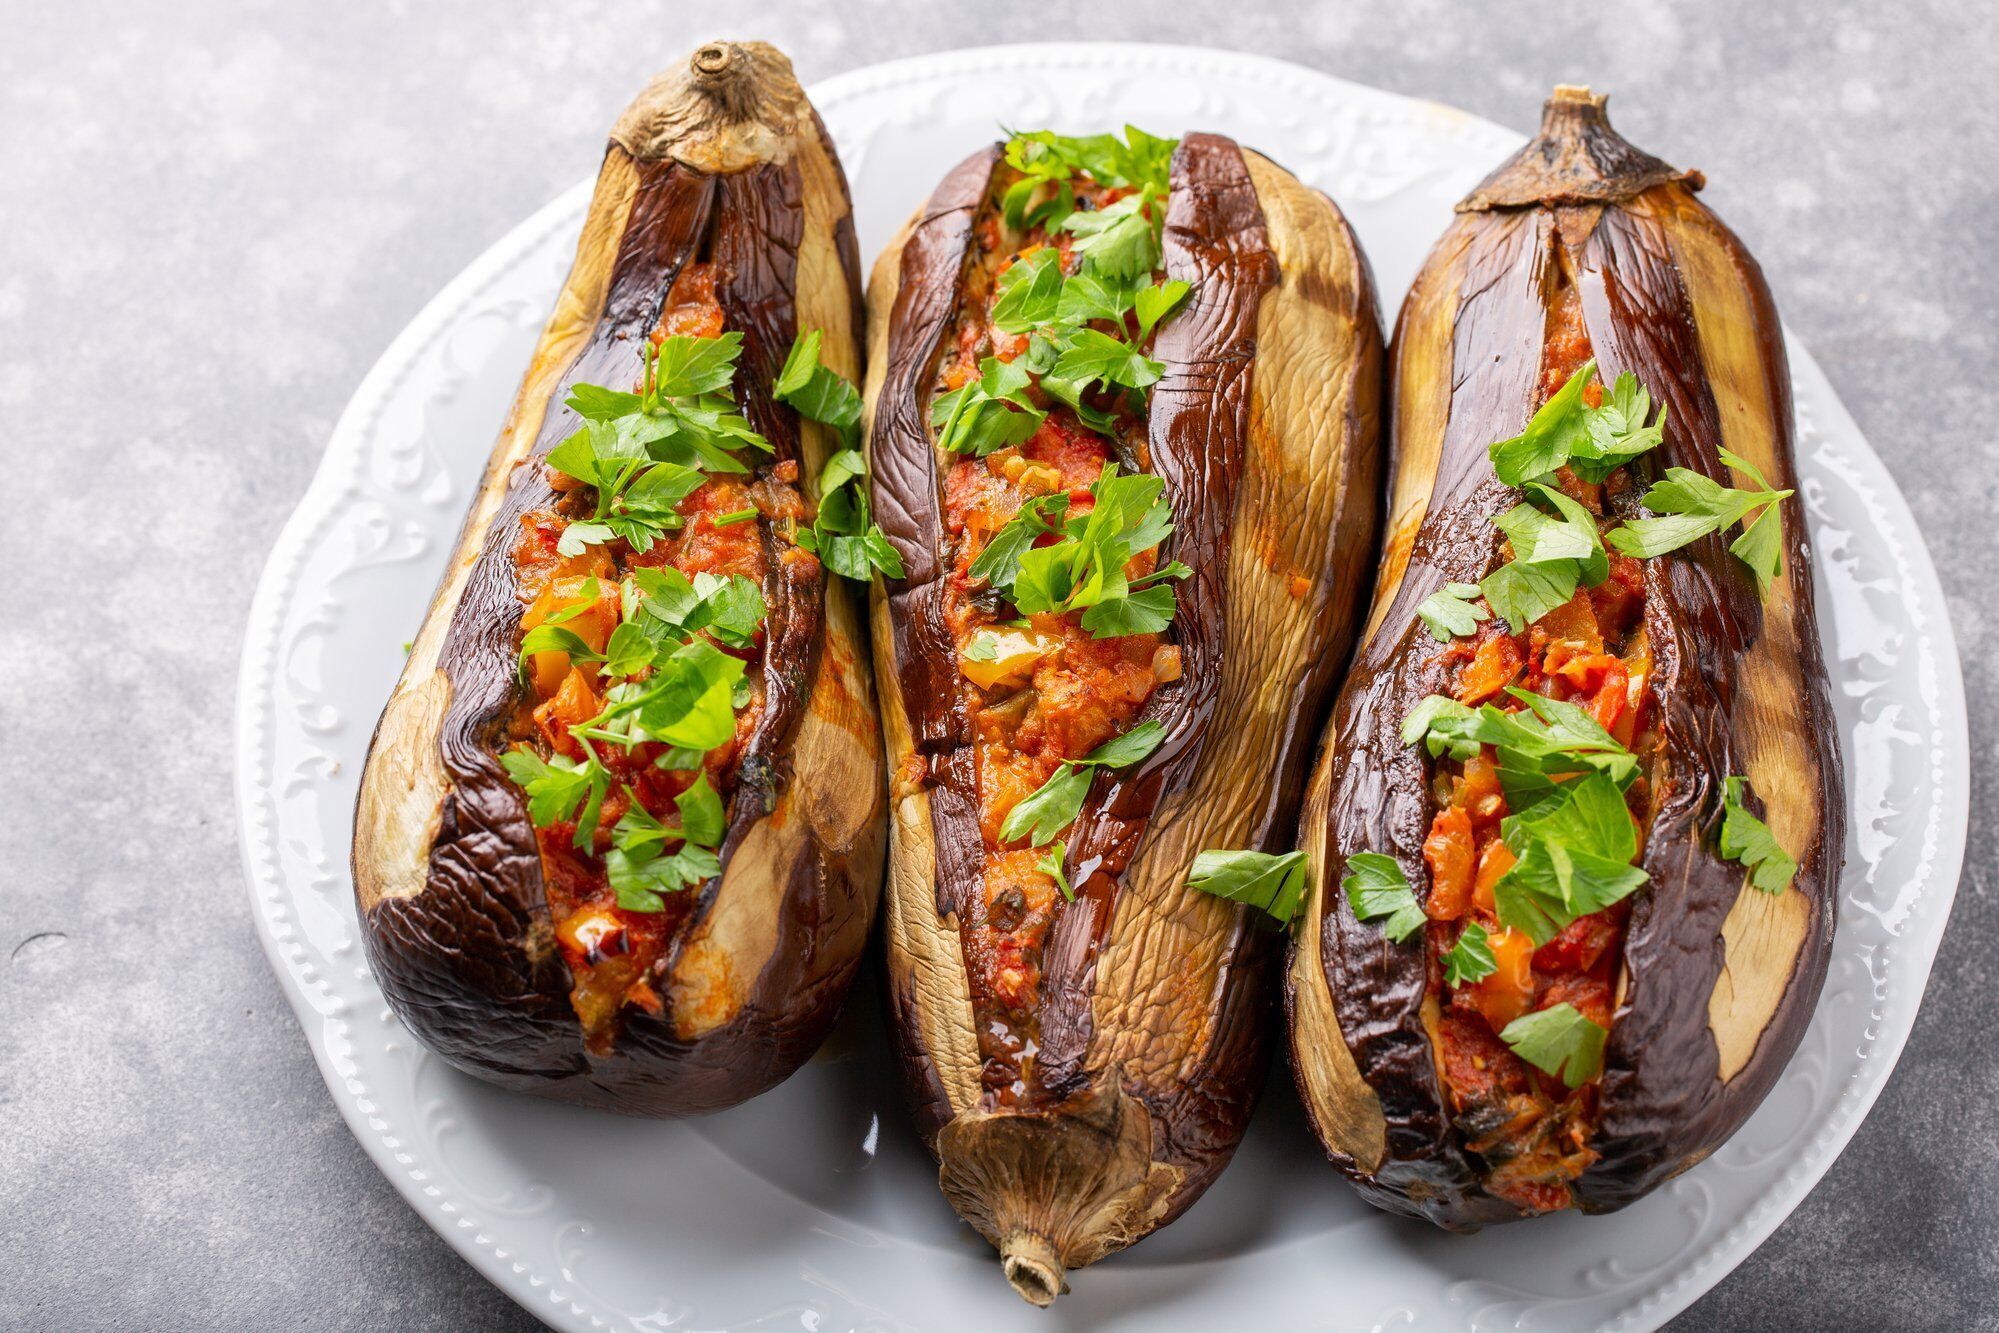 How to cook eggplants deliciously